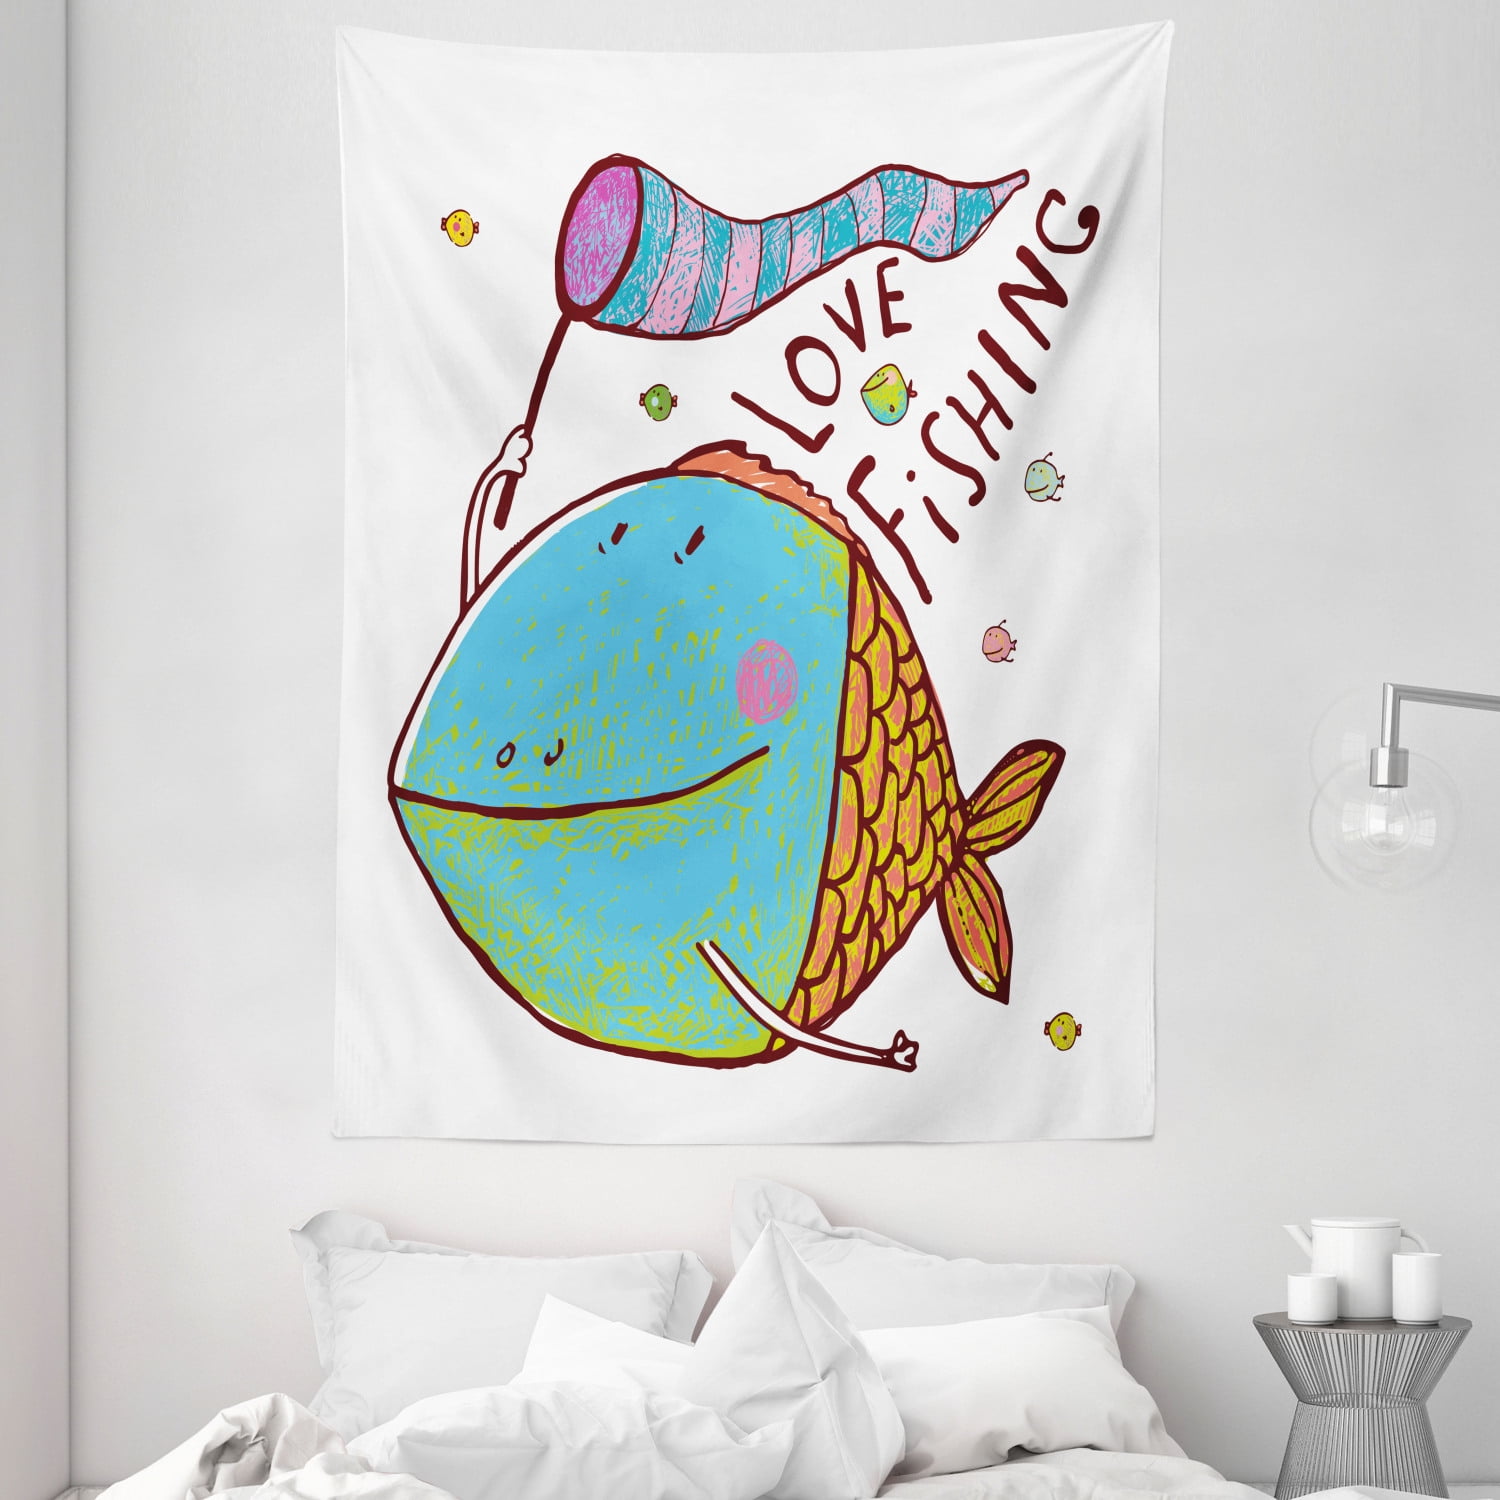 Fishing Tapestry, Kids Cute Large Fat Fish Holding a Flag with